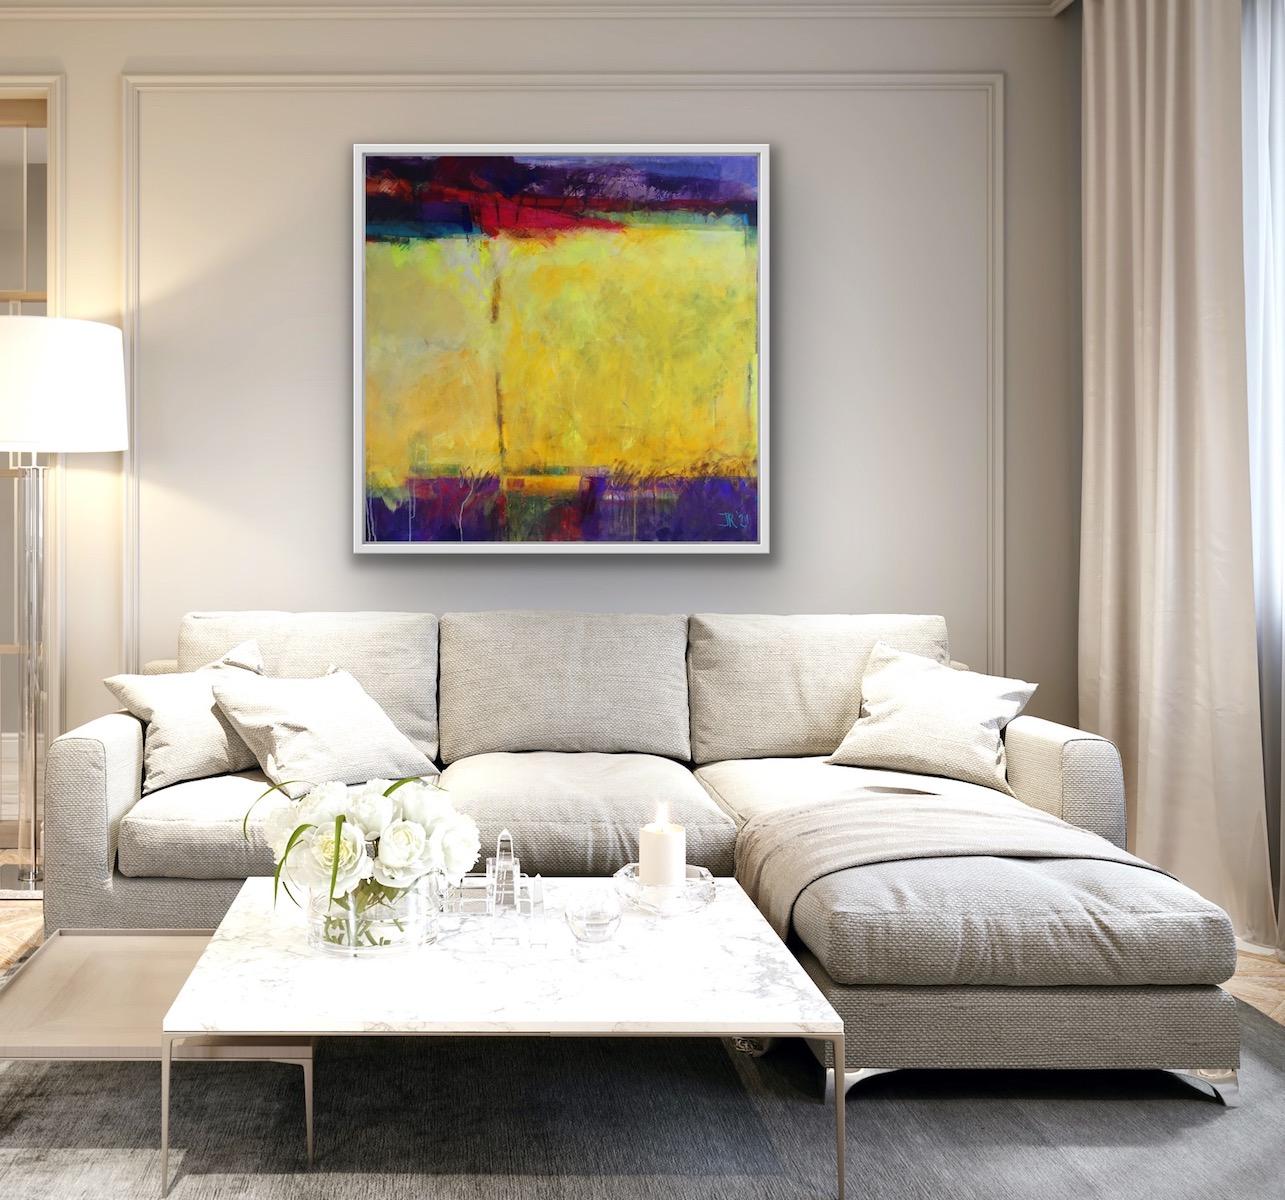 Burned Gold was the Colour, Abstract expressionist, Bright Bold Statement Art  - Painting by Jon Rowland 